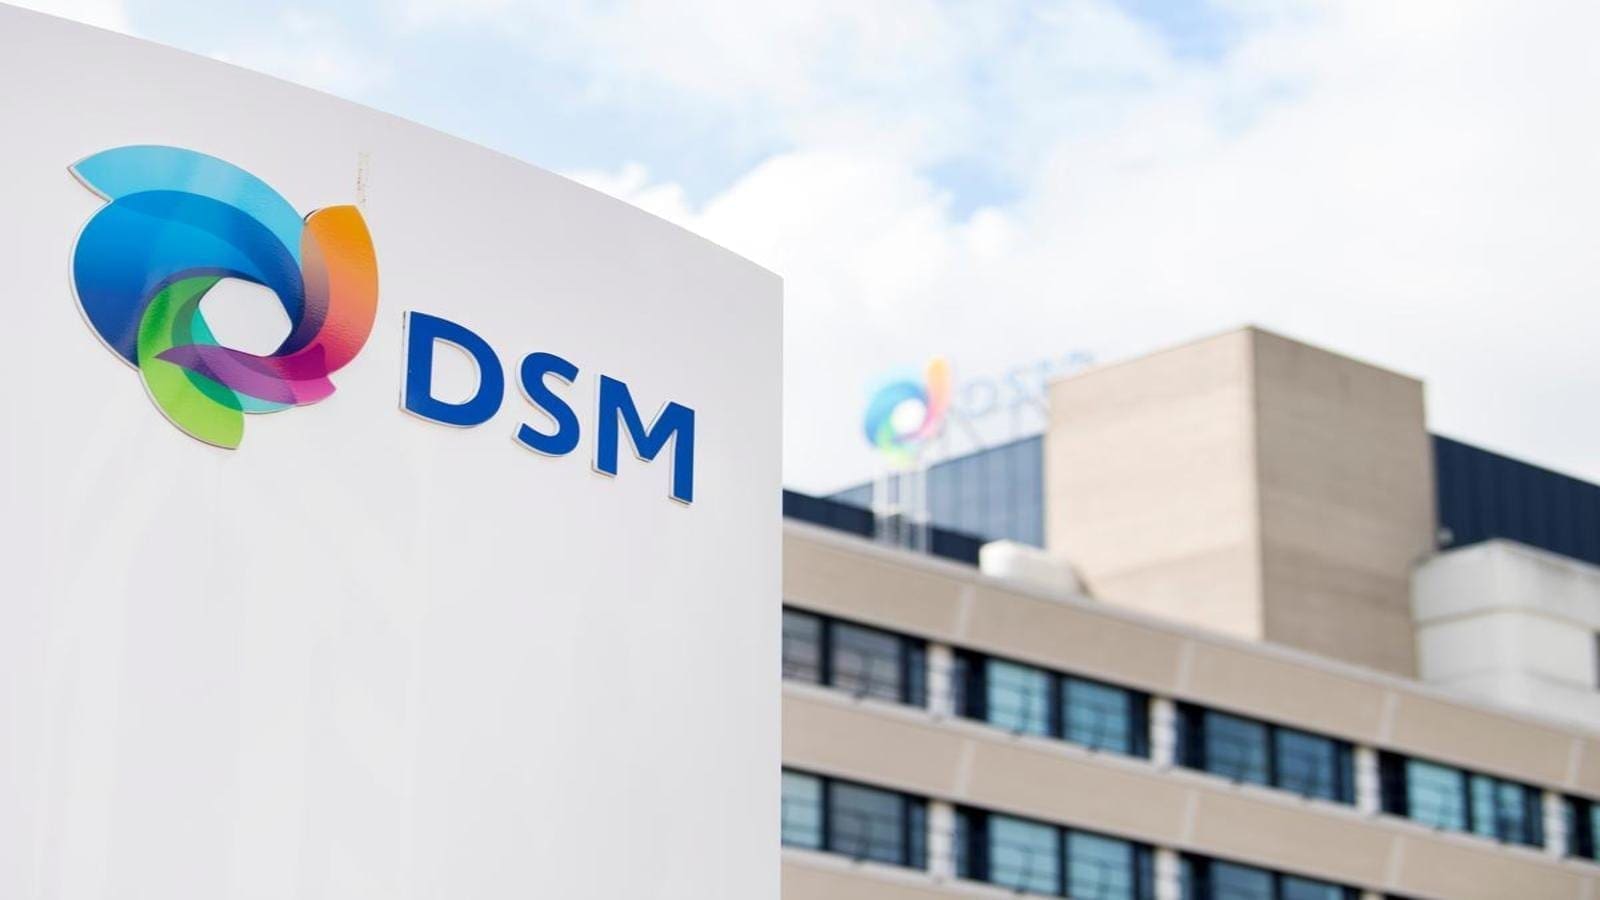 <strong>DSM takes Mara to court over patent infringement on its algal oil innovations</strong>